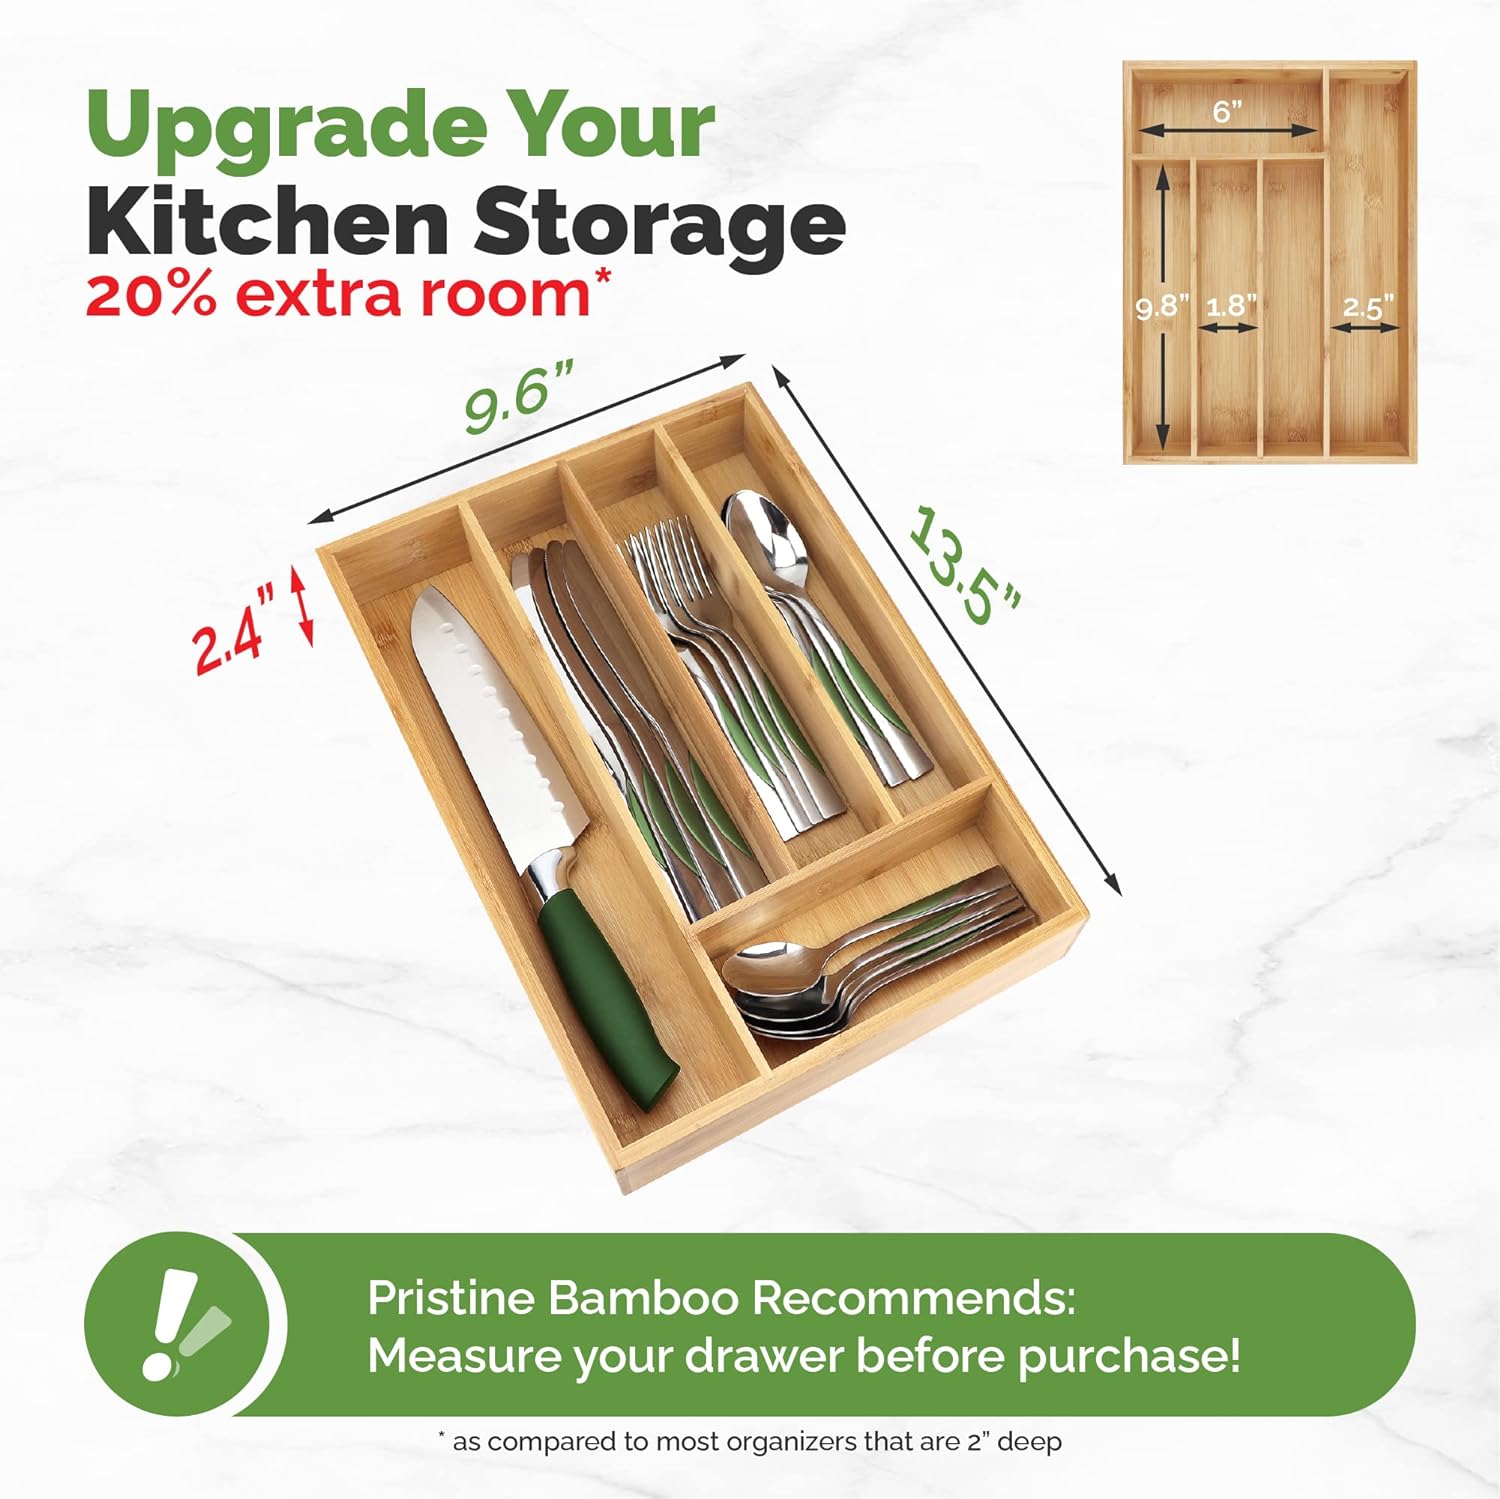 Pristine Bamboo Silverware Organizer for Kitchen Drawers with 5 Slots